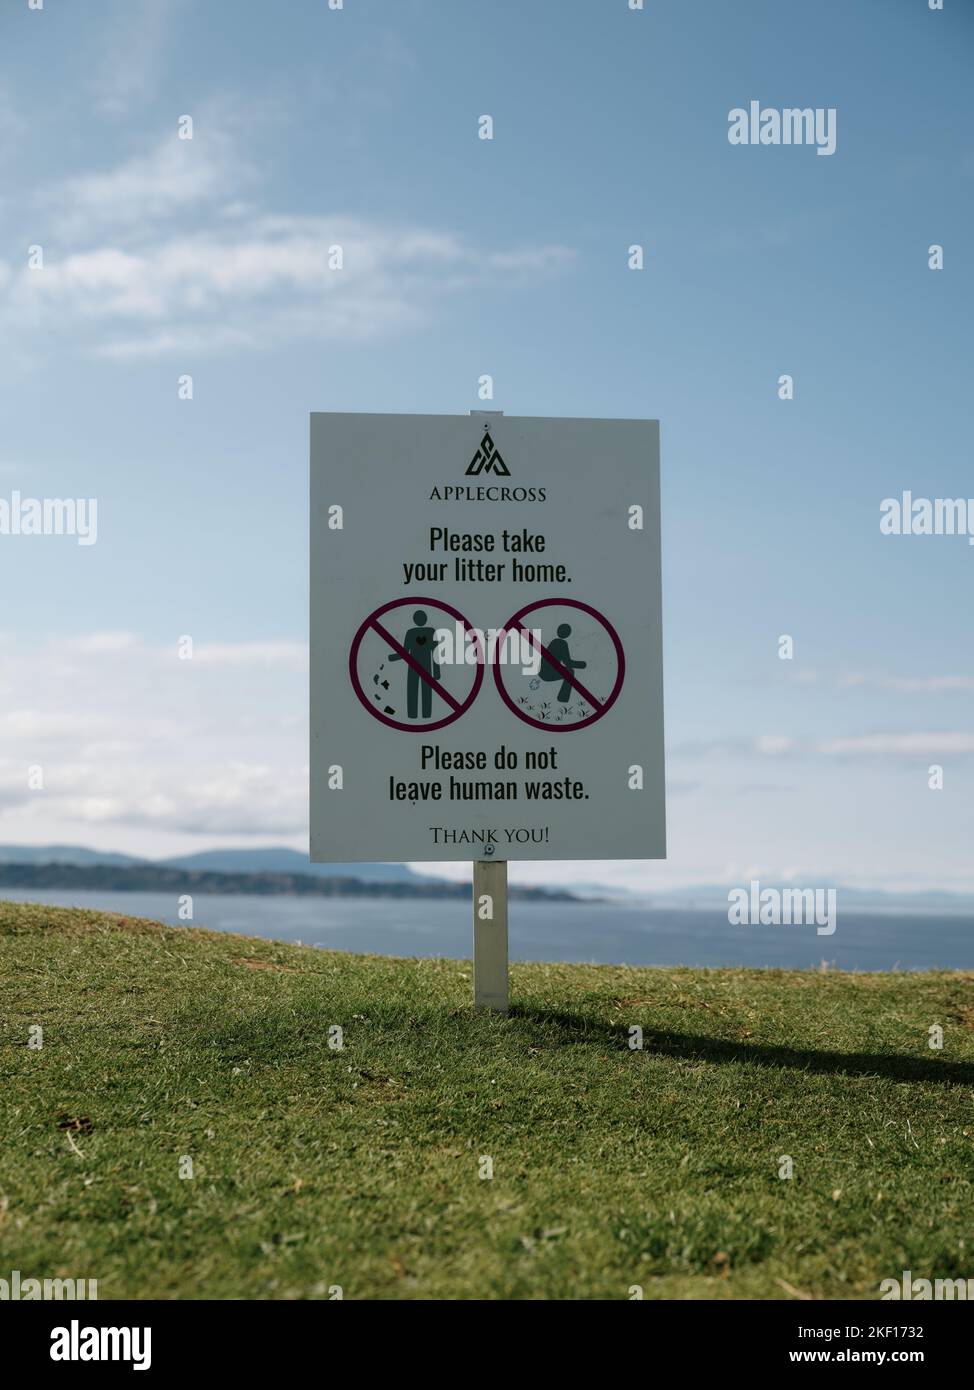 Please take your litter home - do not leave human waste sign in the west coast Scotland summer landscape - overtourism tourist problem Stock Photo